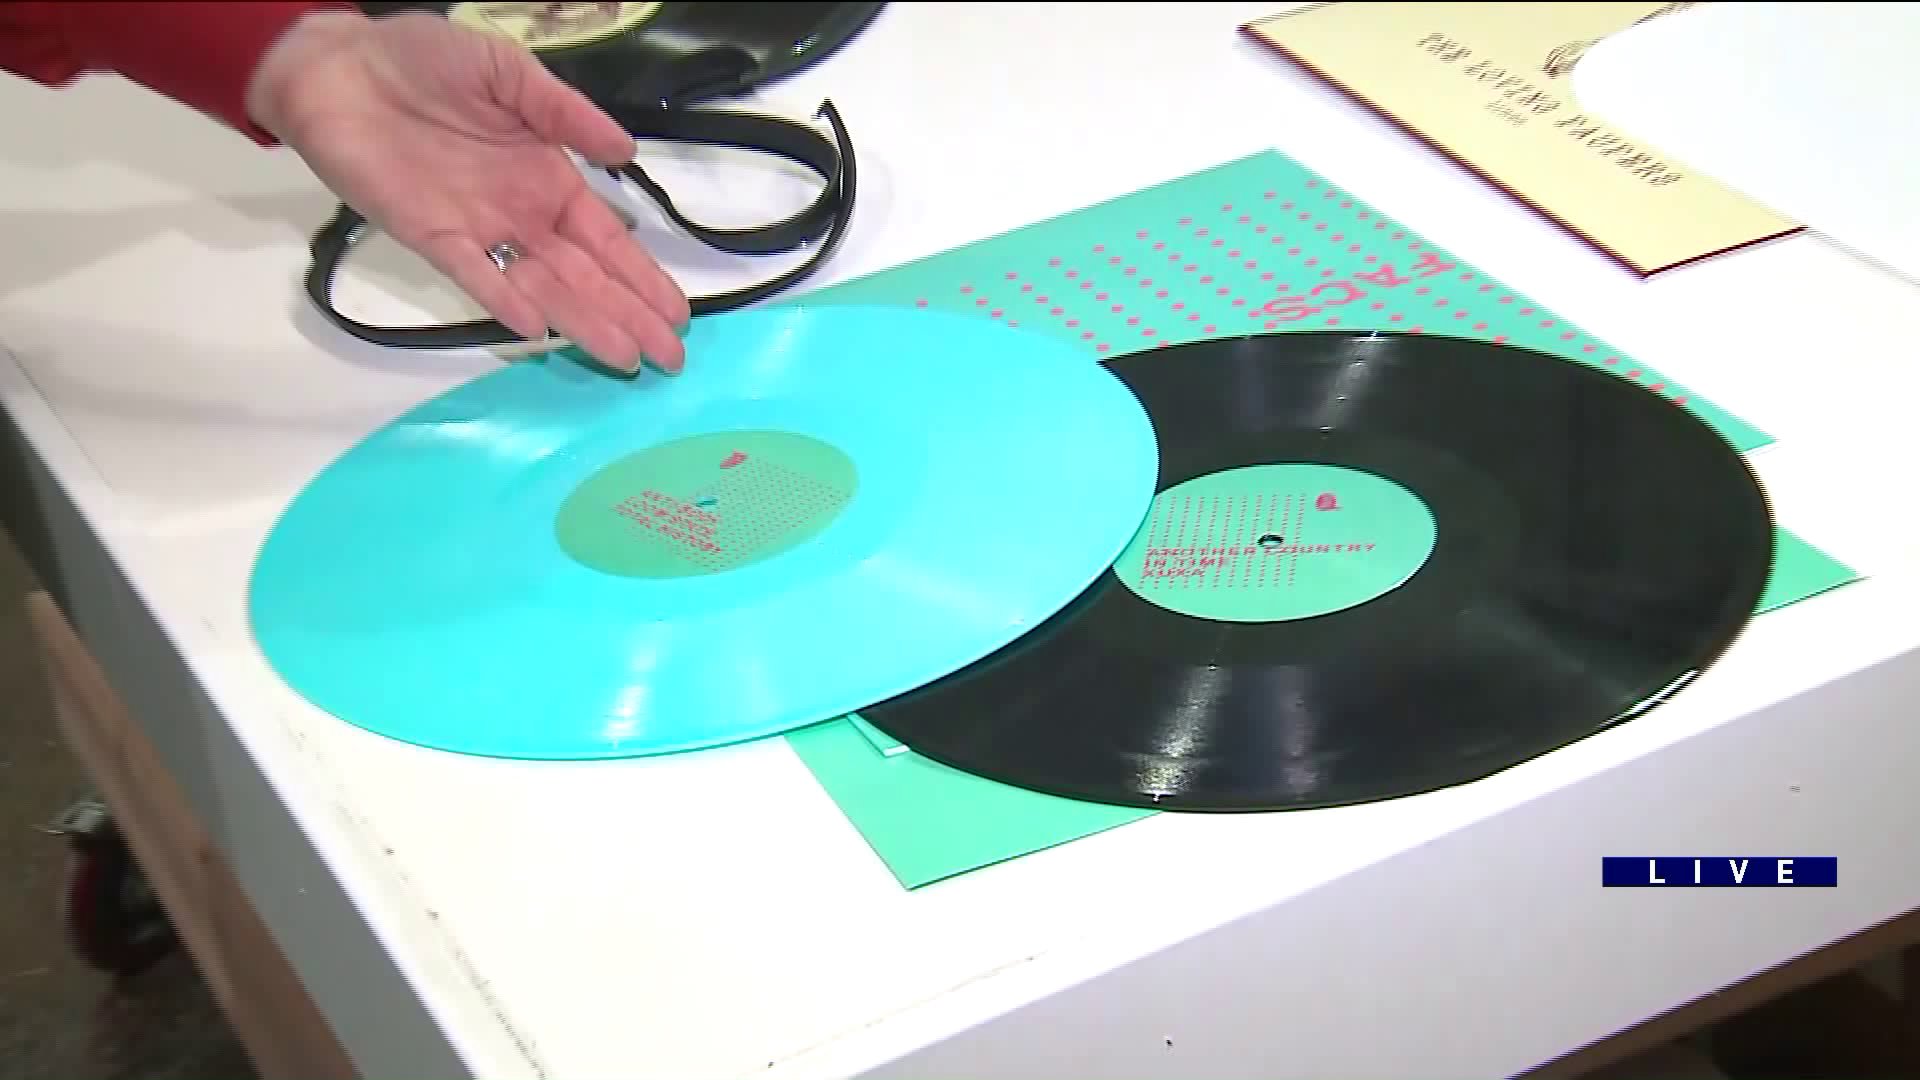 Around Town learns how a record is made at Smashed Plastic